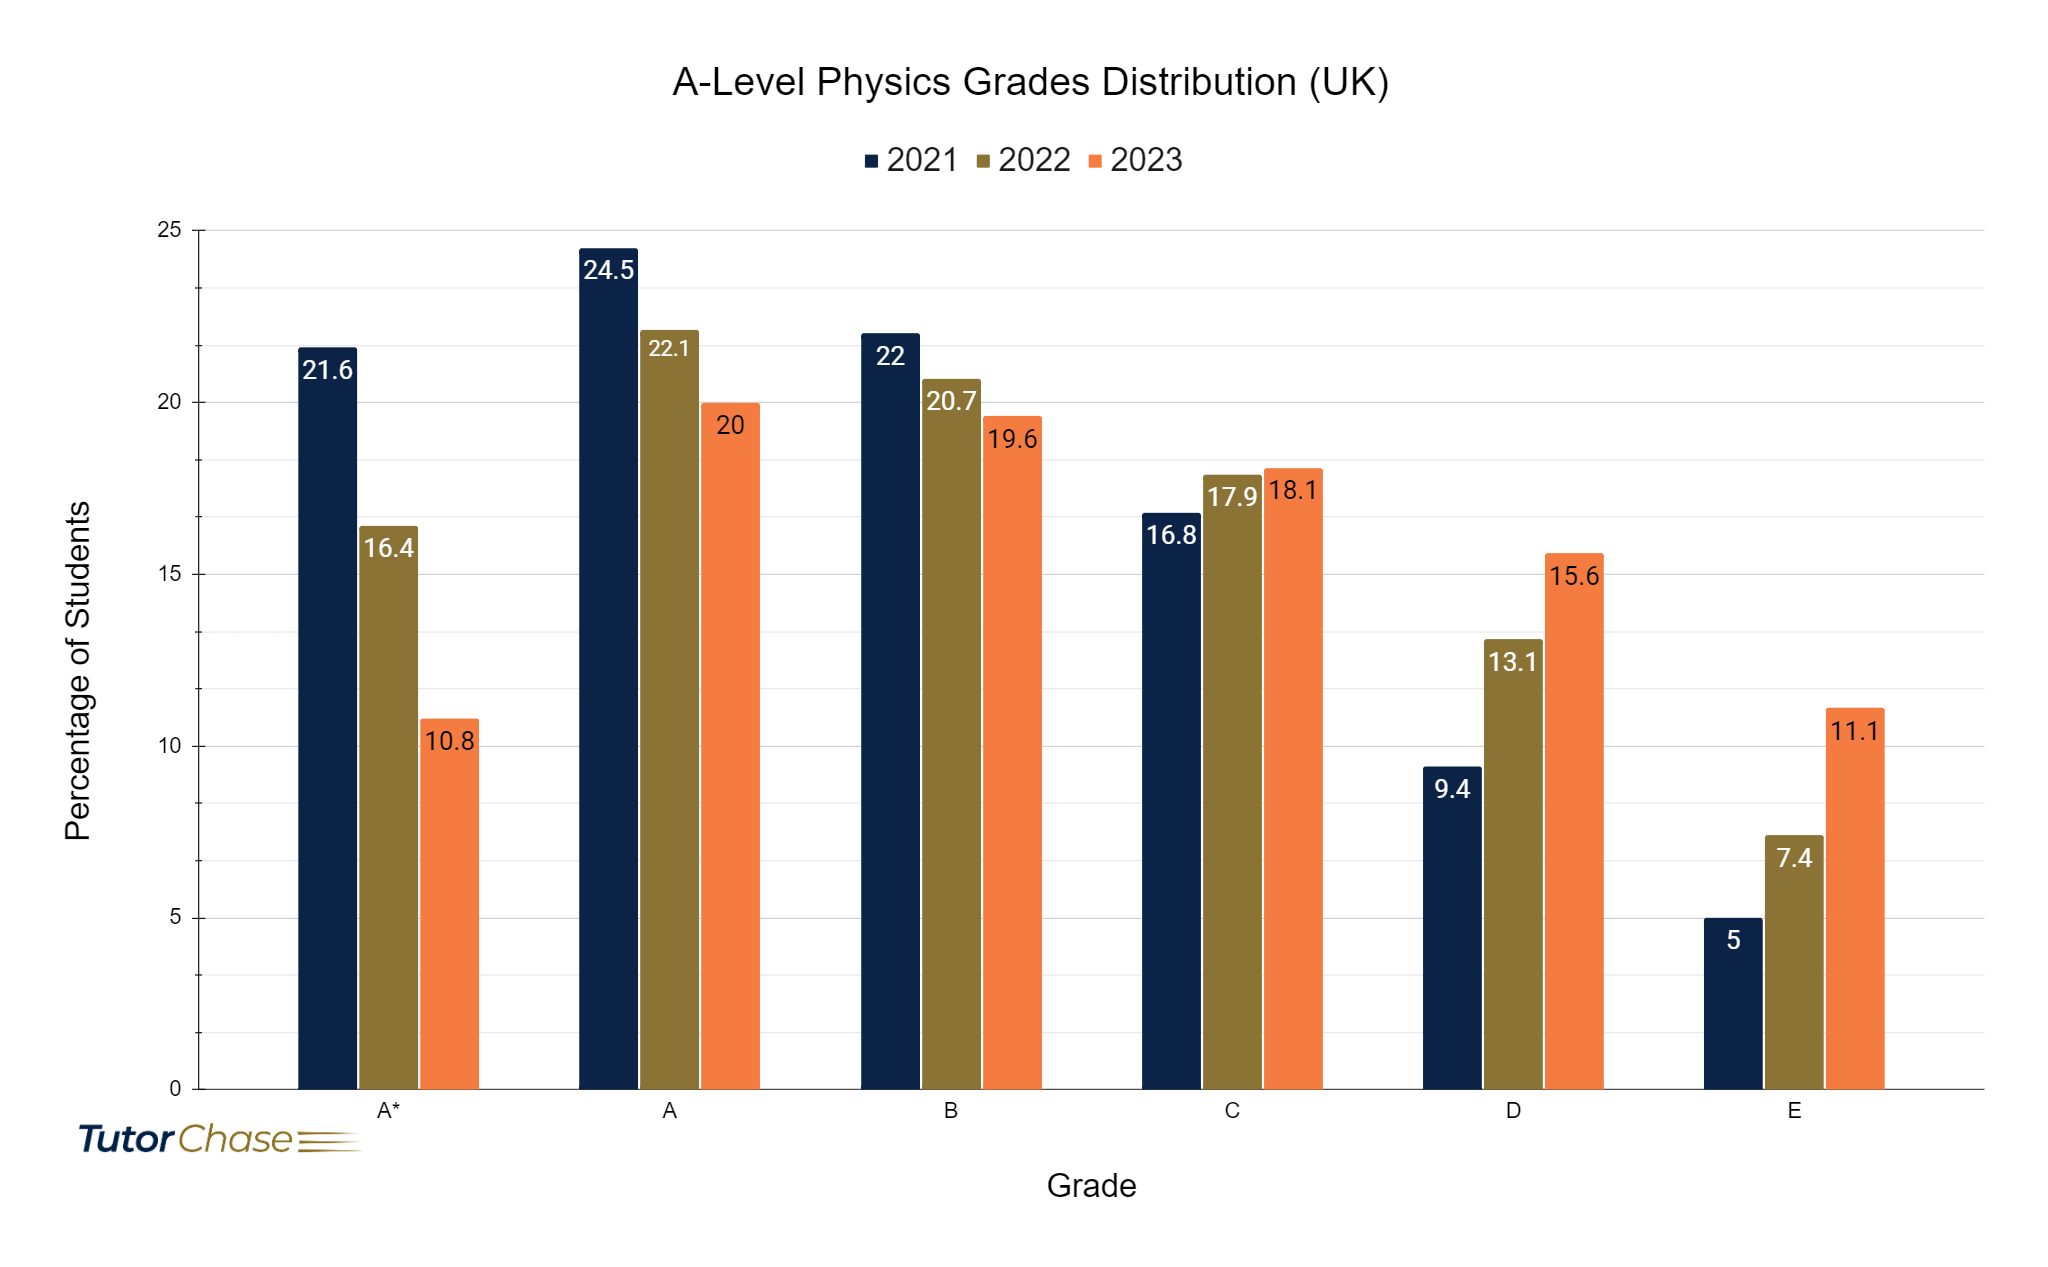 Grades distribution of A-Level Physics in UK 2021-2023